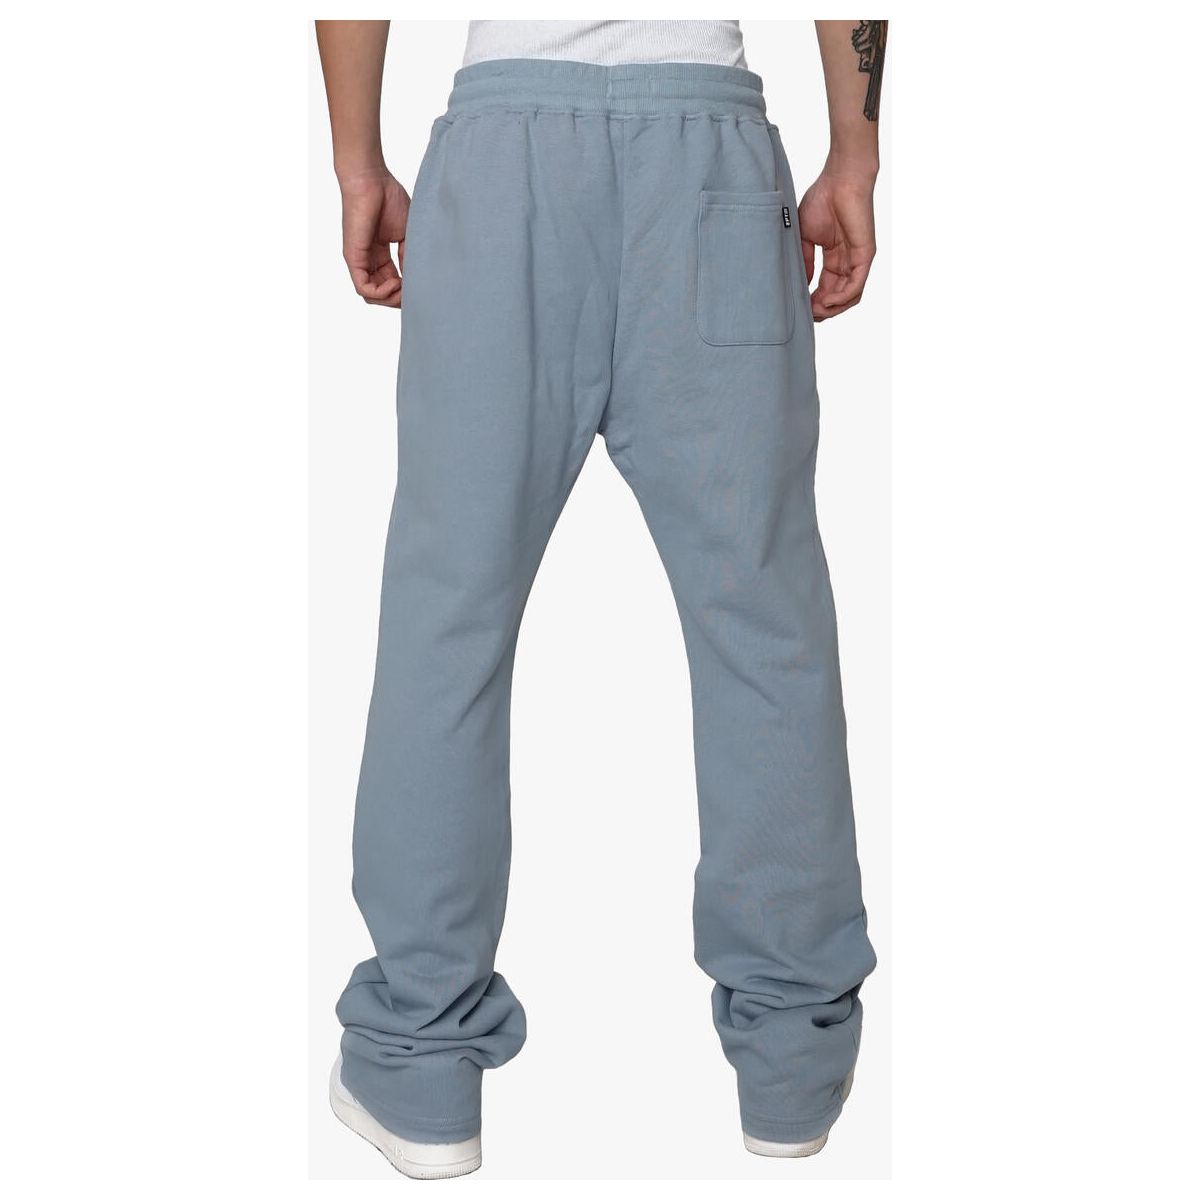 EPTM French Terry Flare Pants - Denim Blue (EP10998)